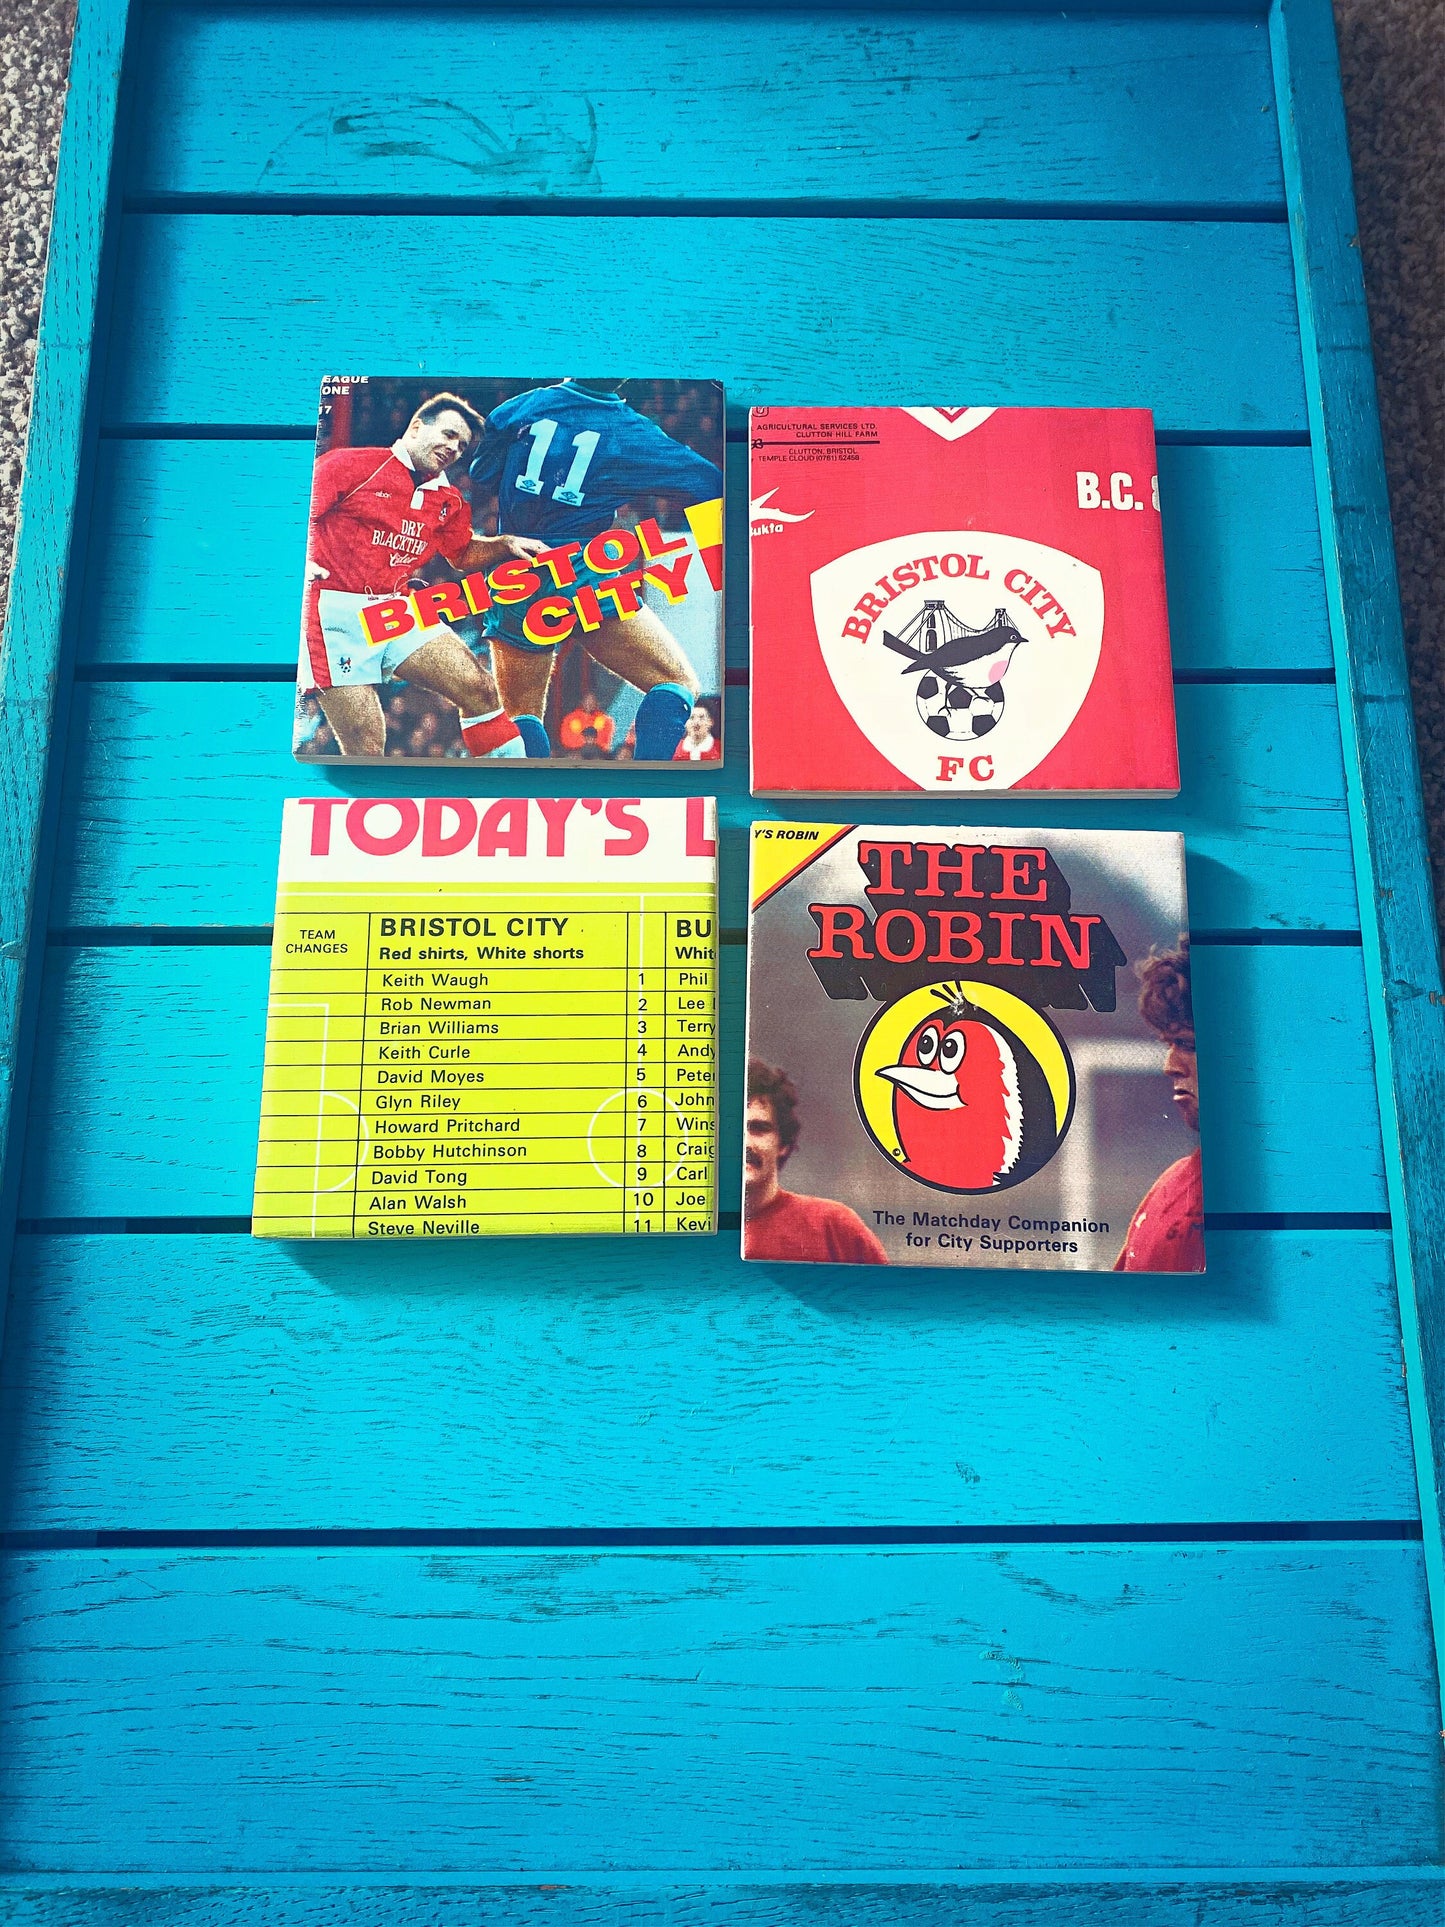 Vintage Bristol City Football Programme Coasters. Upcycled Football Gift. Man Cave Home Decor. Retro Football Gift for Dad.